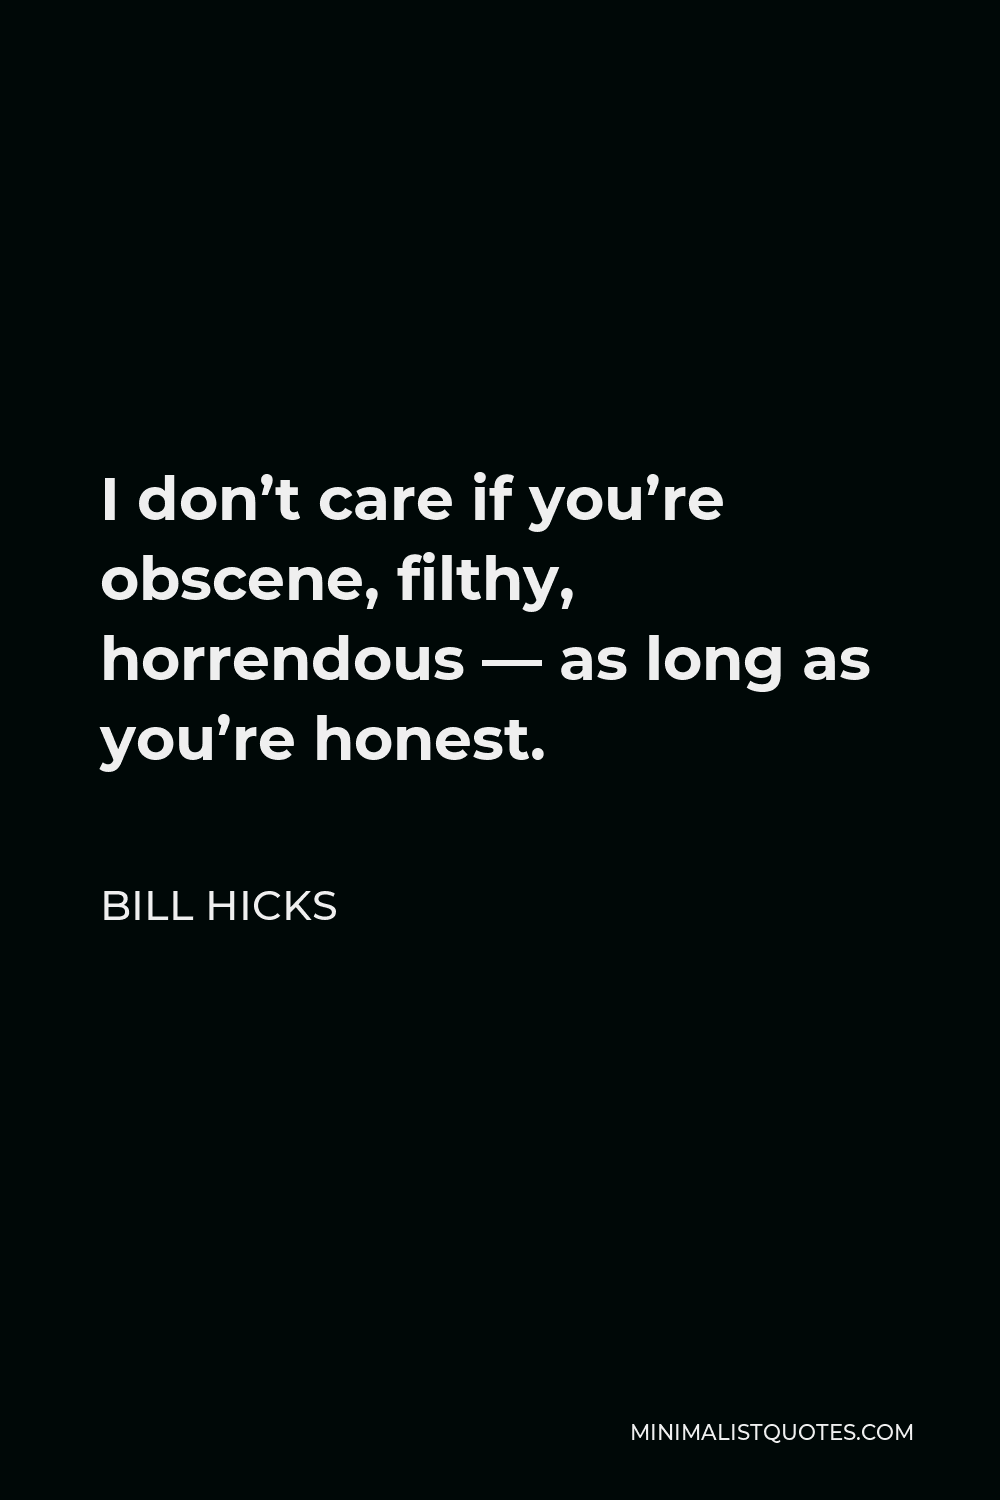 Bill Hicks Quote - I don’t care if you’re obscene, filthy, horrendous — as long as you’re honest.